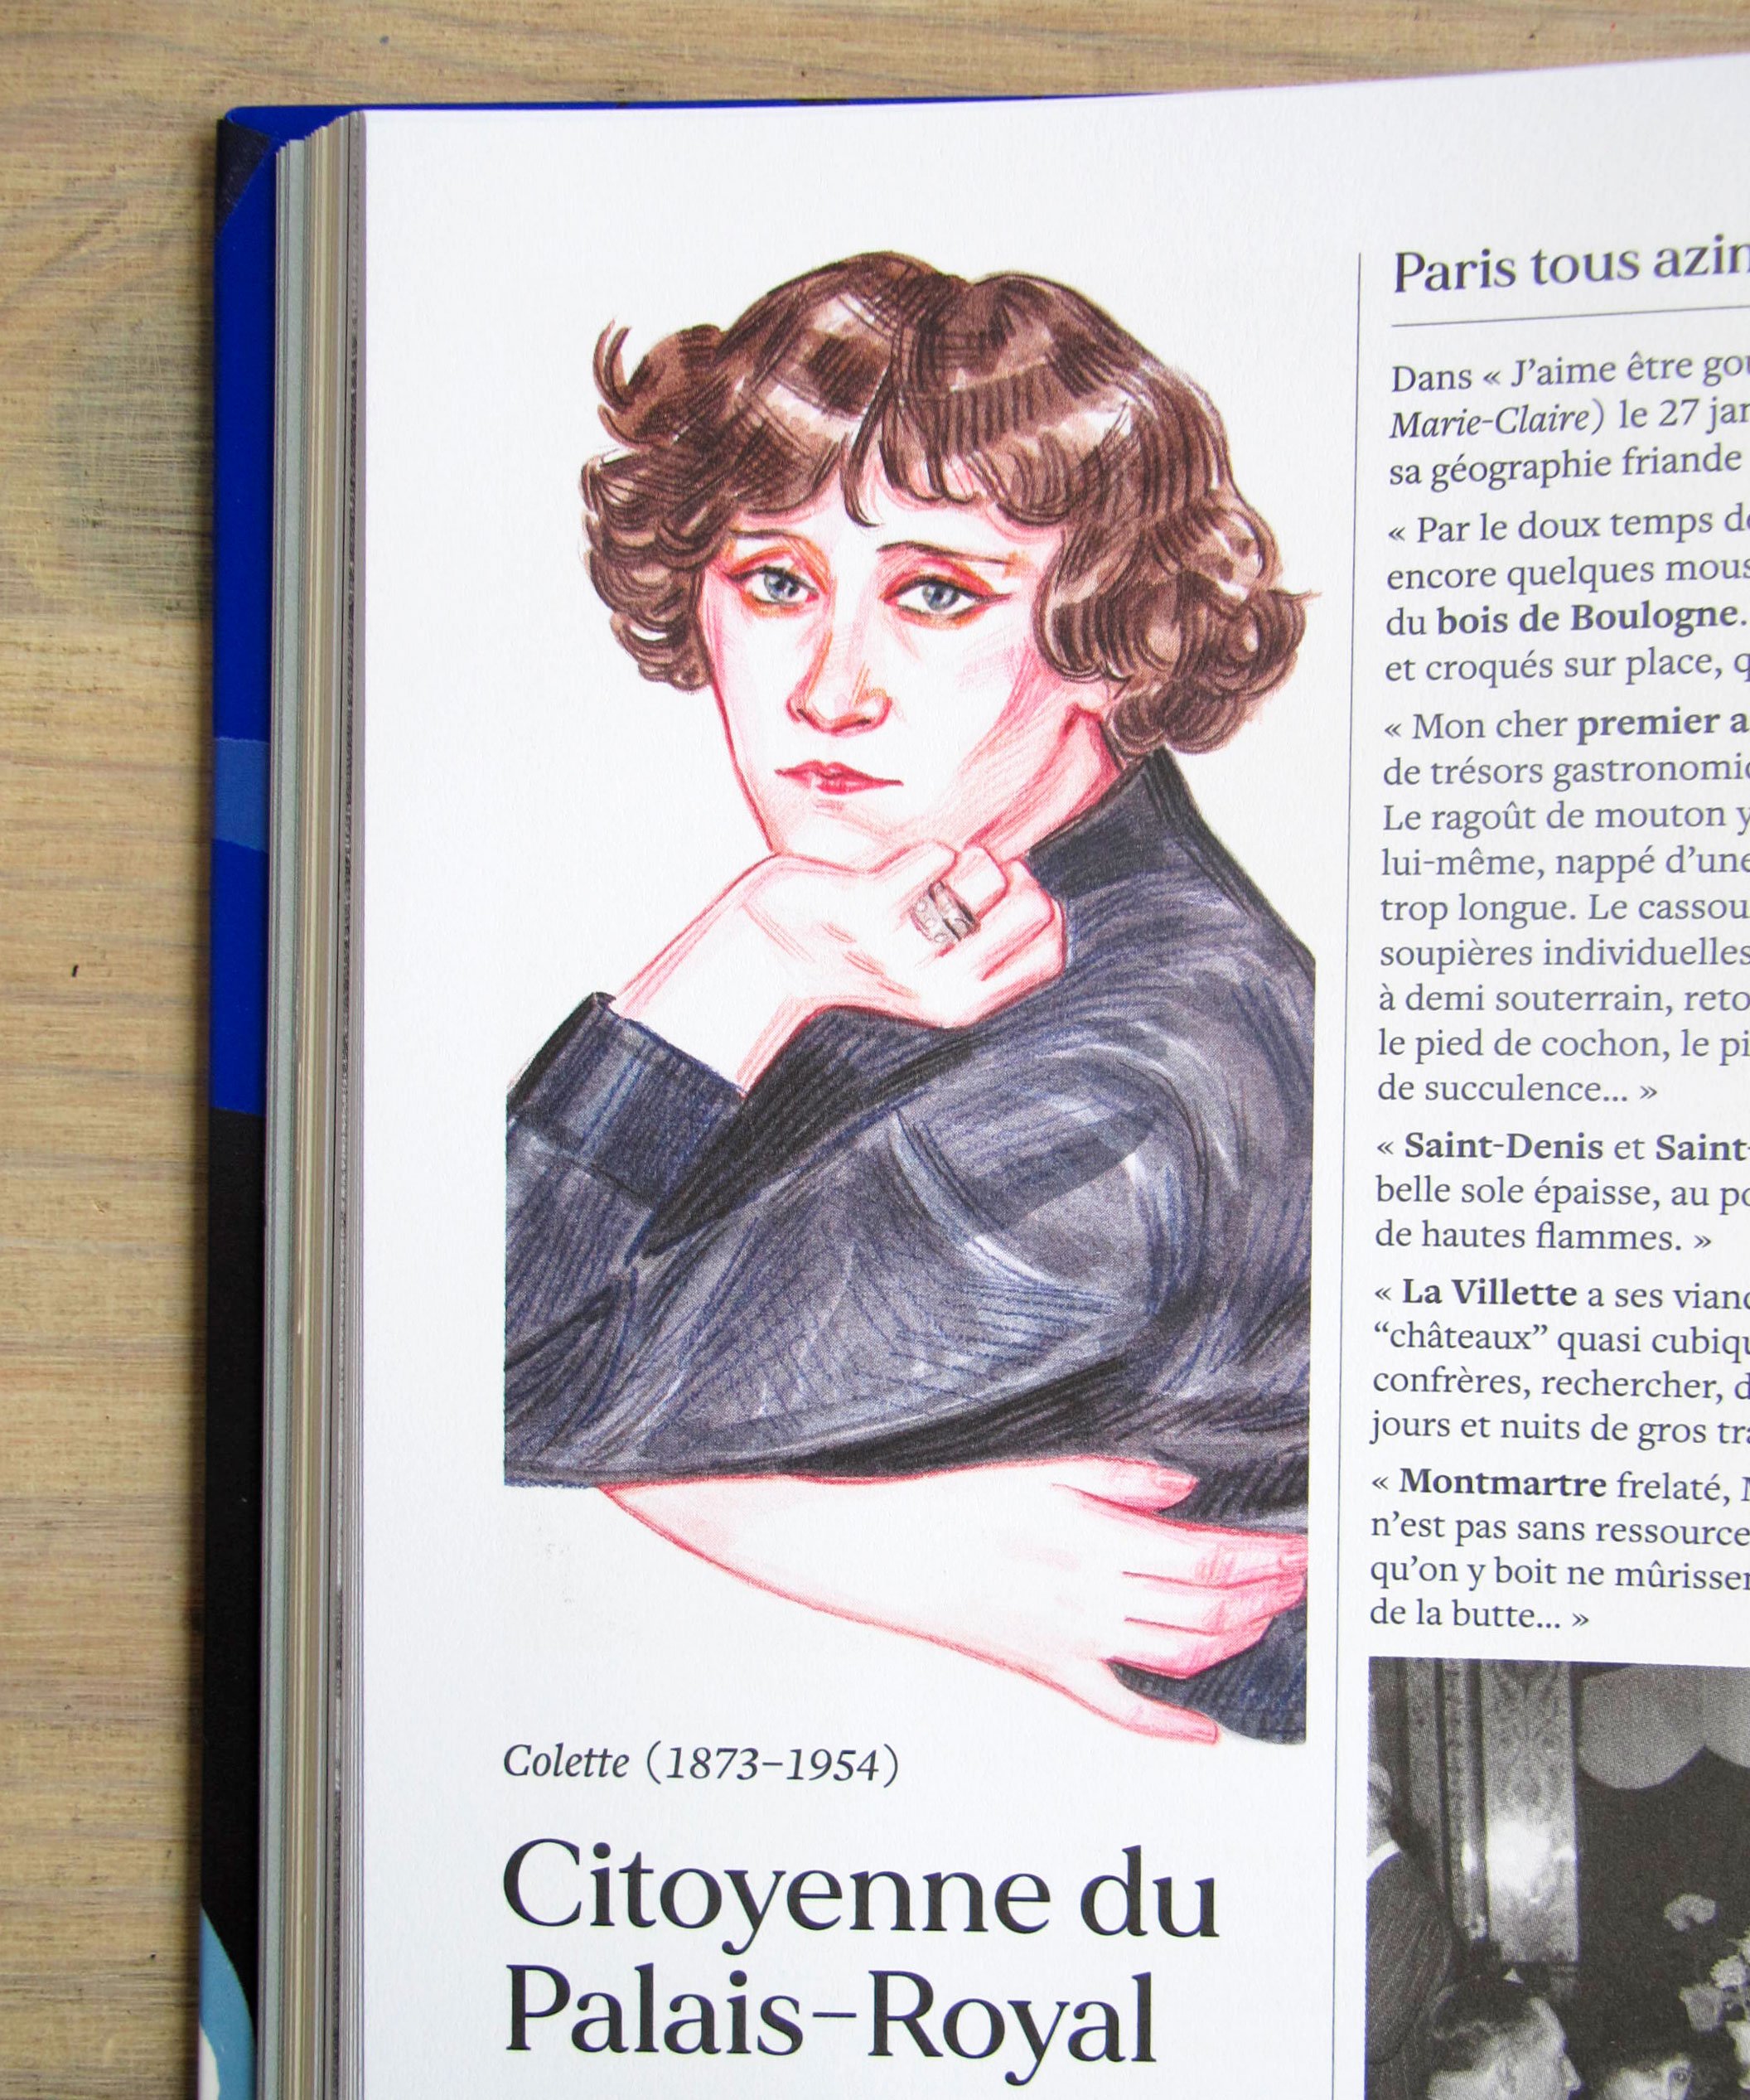 Portrait of French Writer Colette